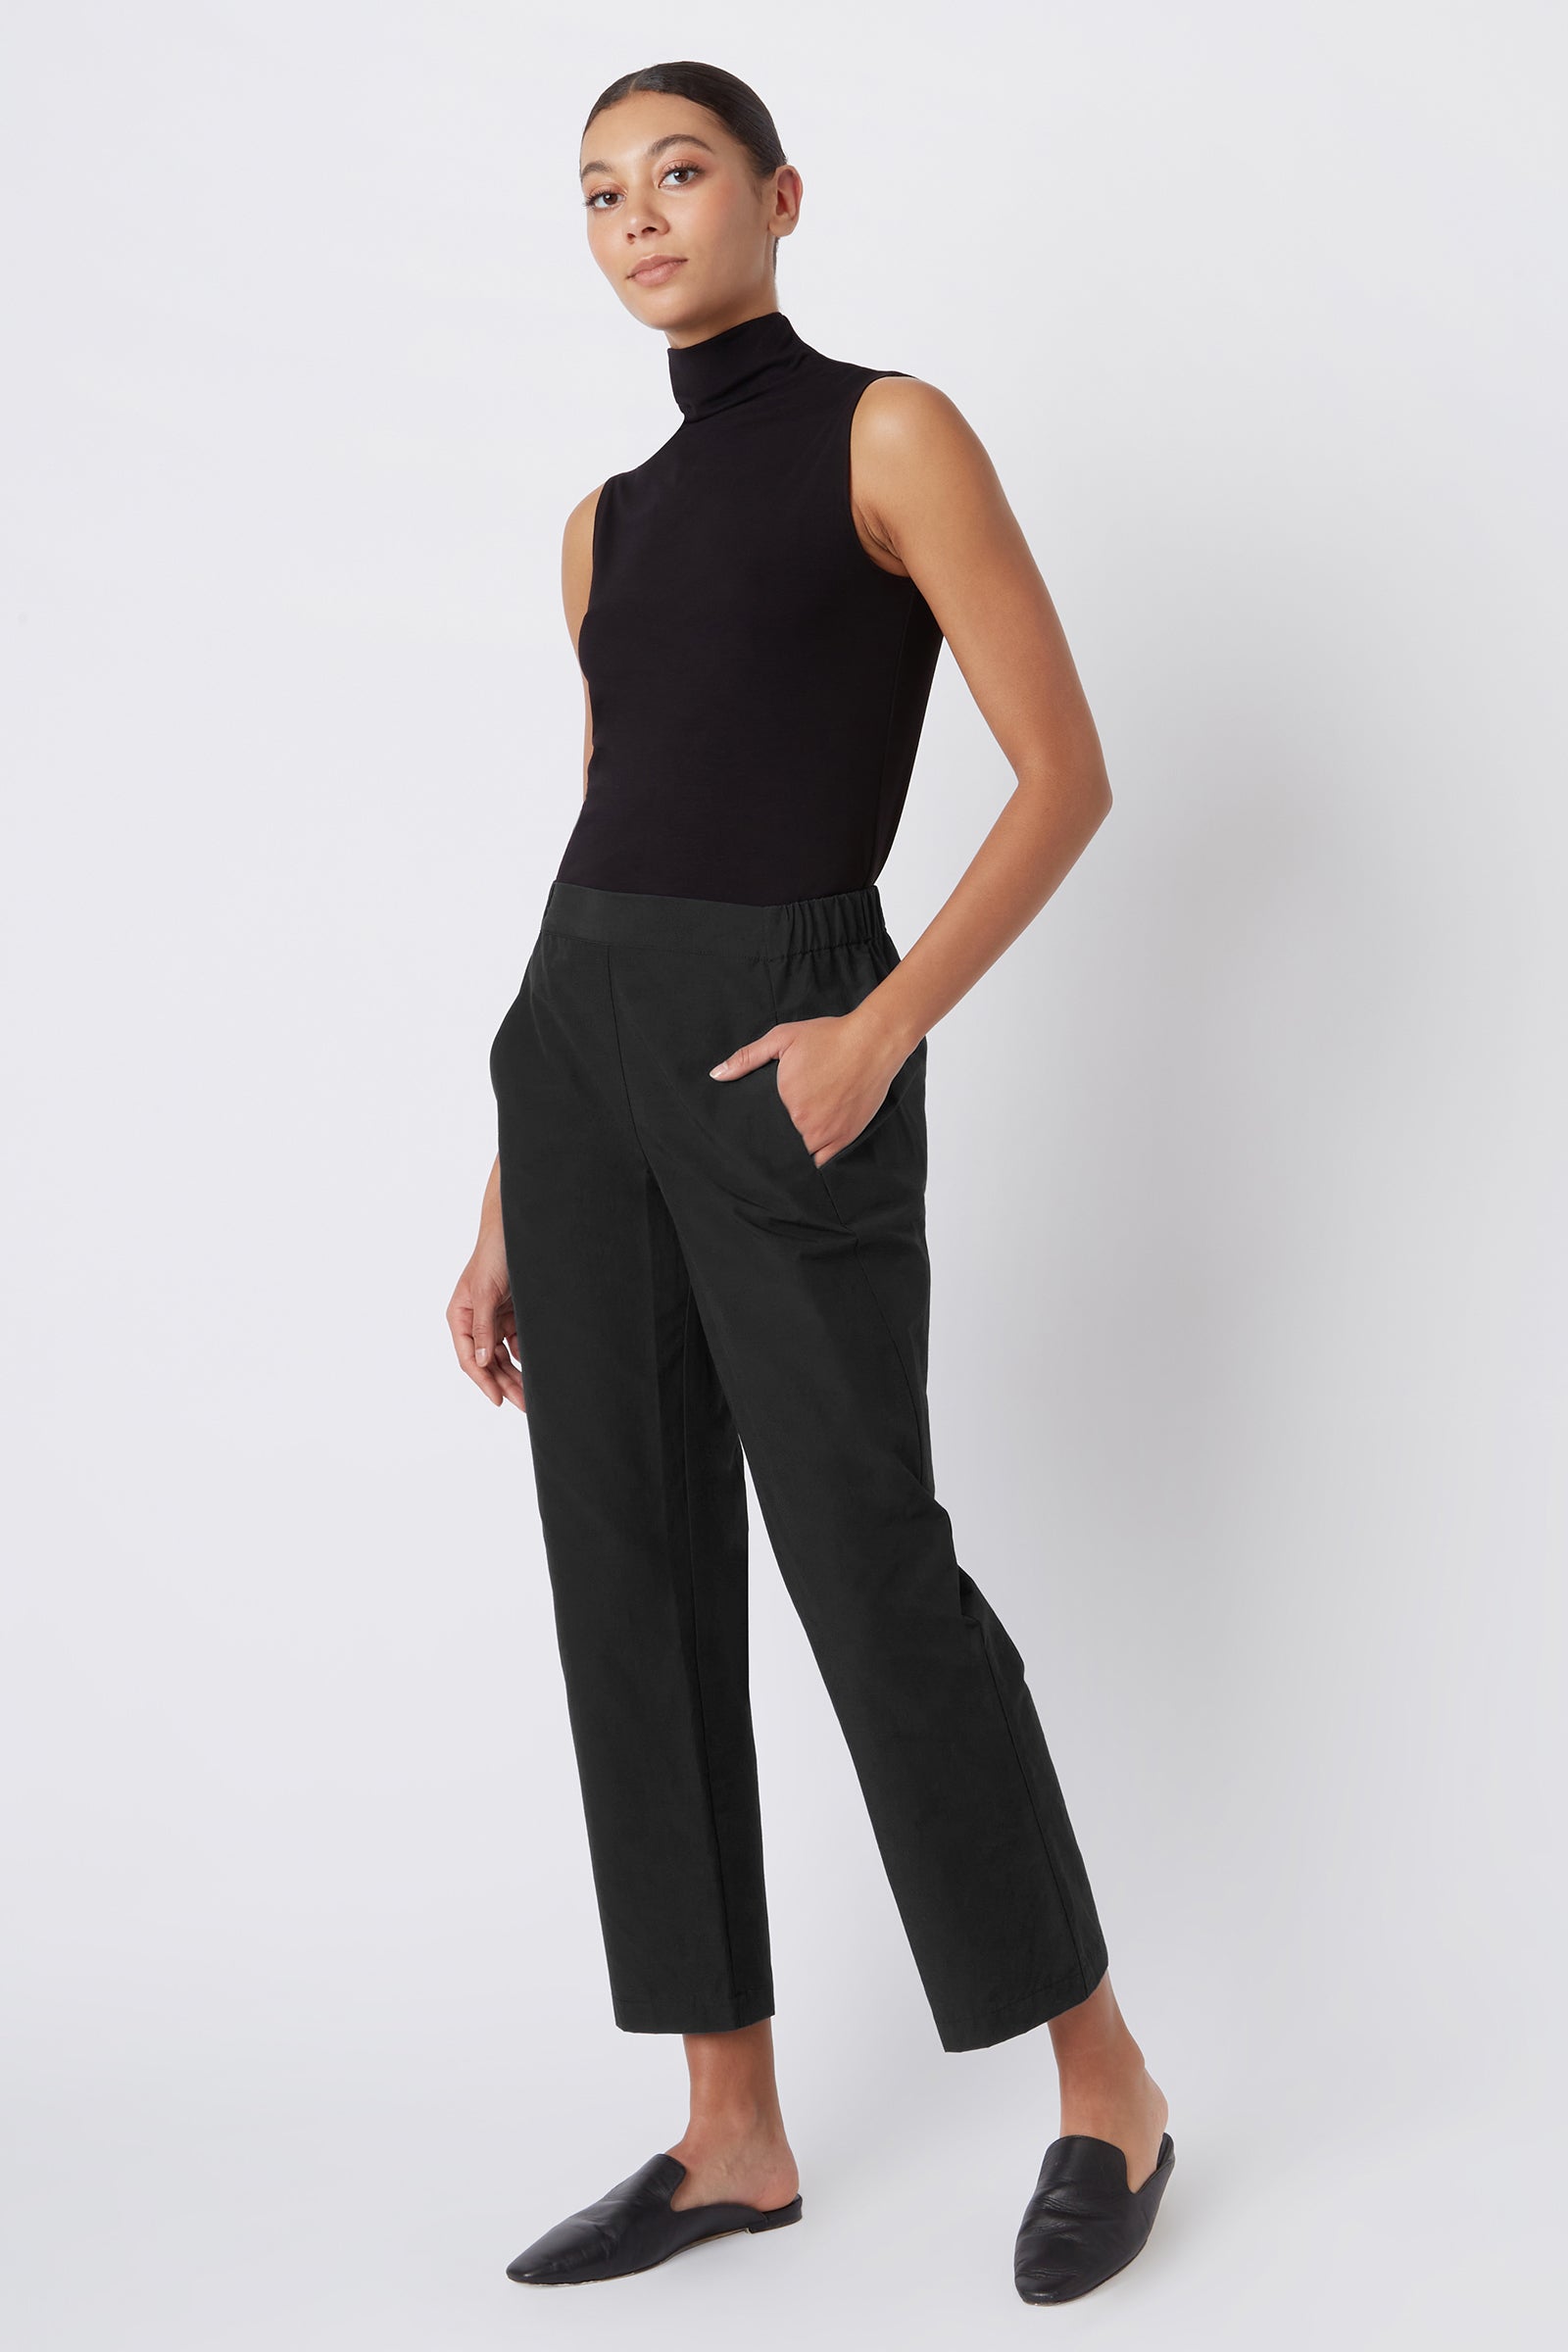 Kal Rieman Brit Crop Pant in Black on Model Angled Full Front View